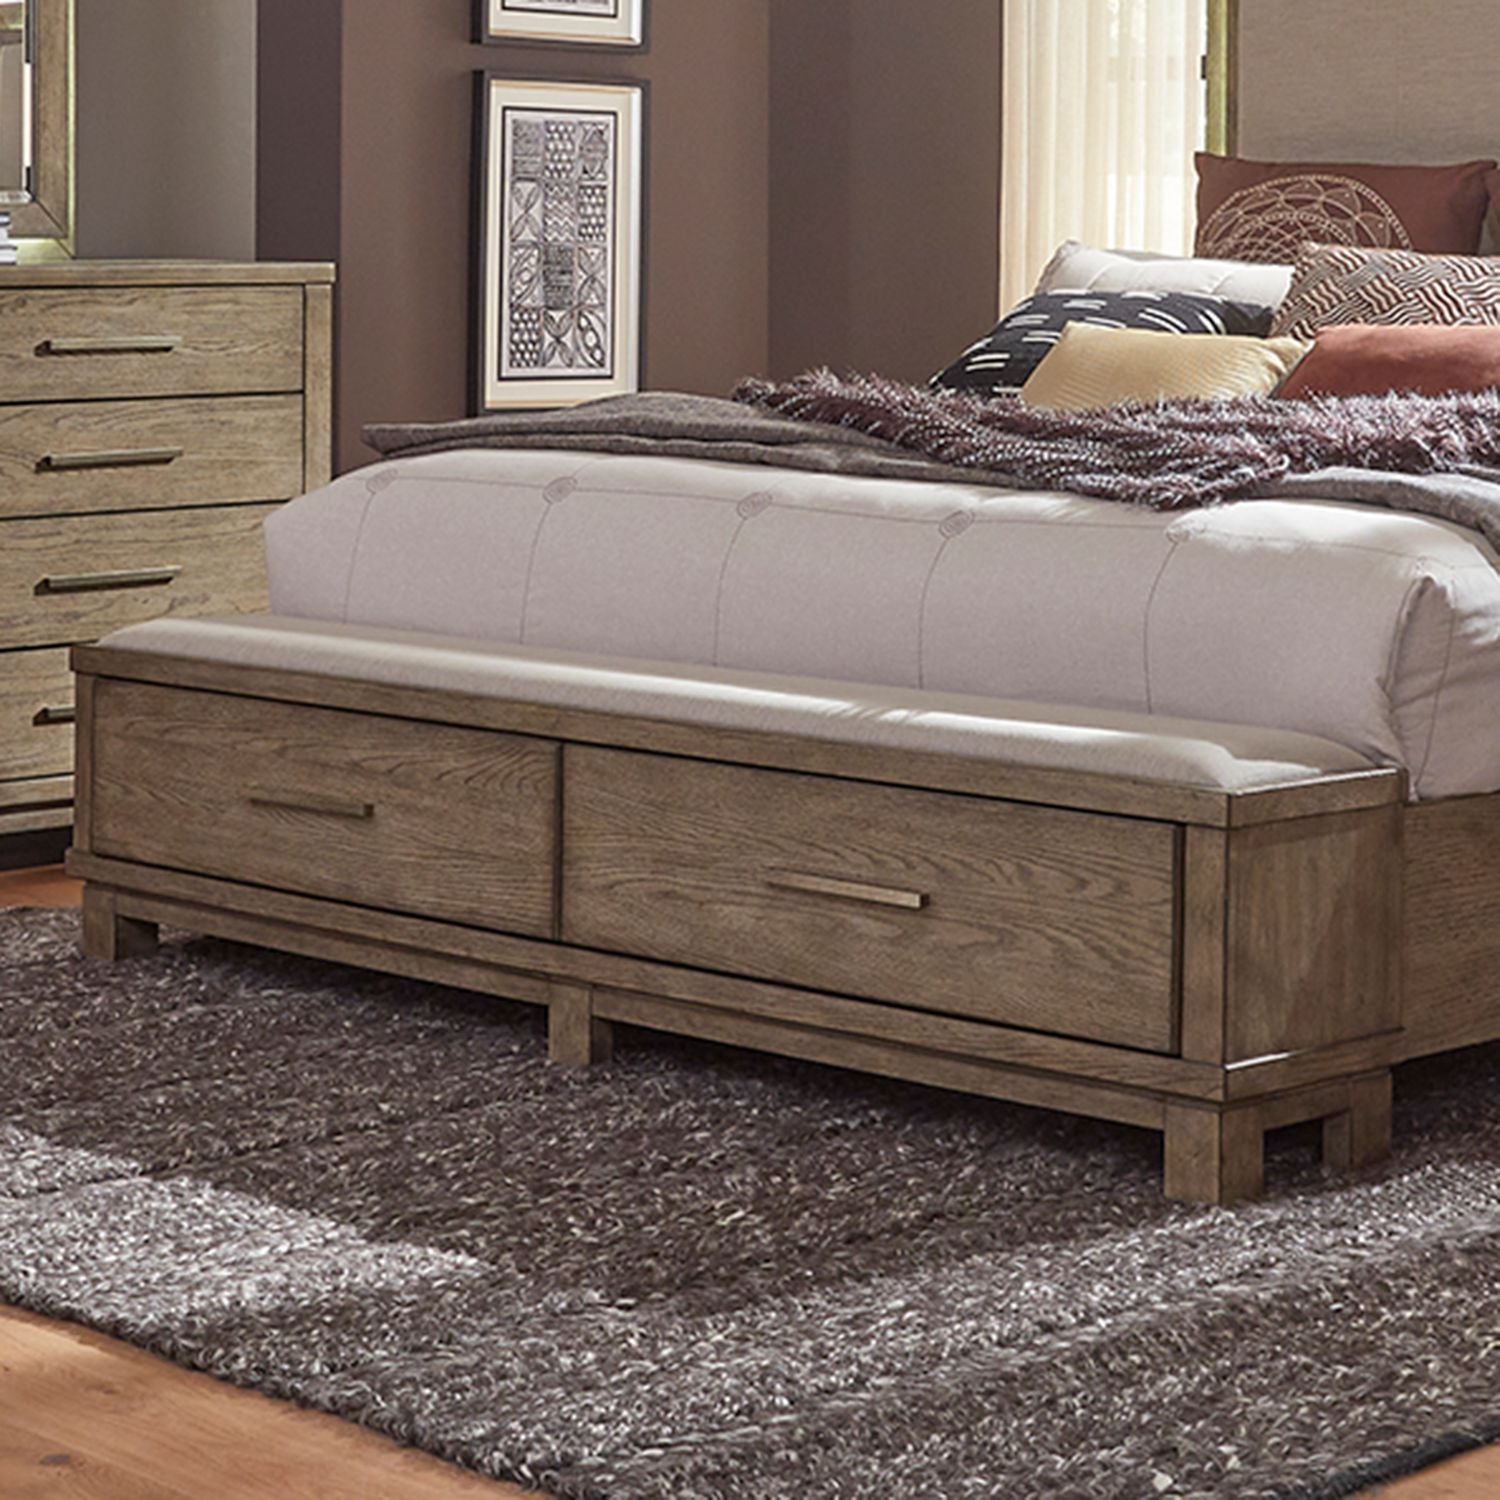 Canyon Road (876-BR) Bedroom Collection from Liberty Furniture